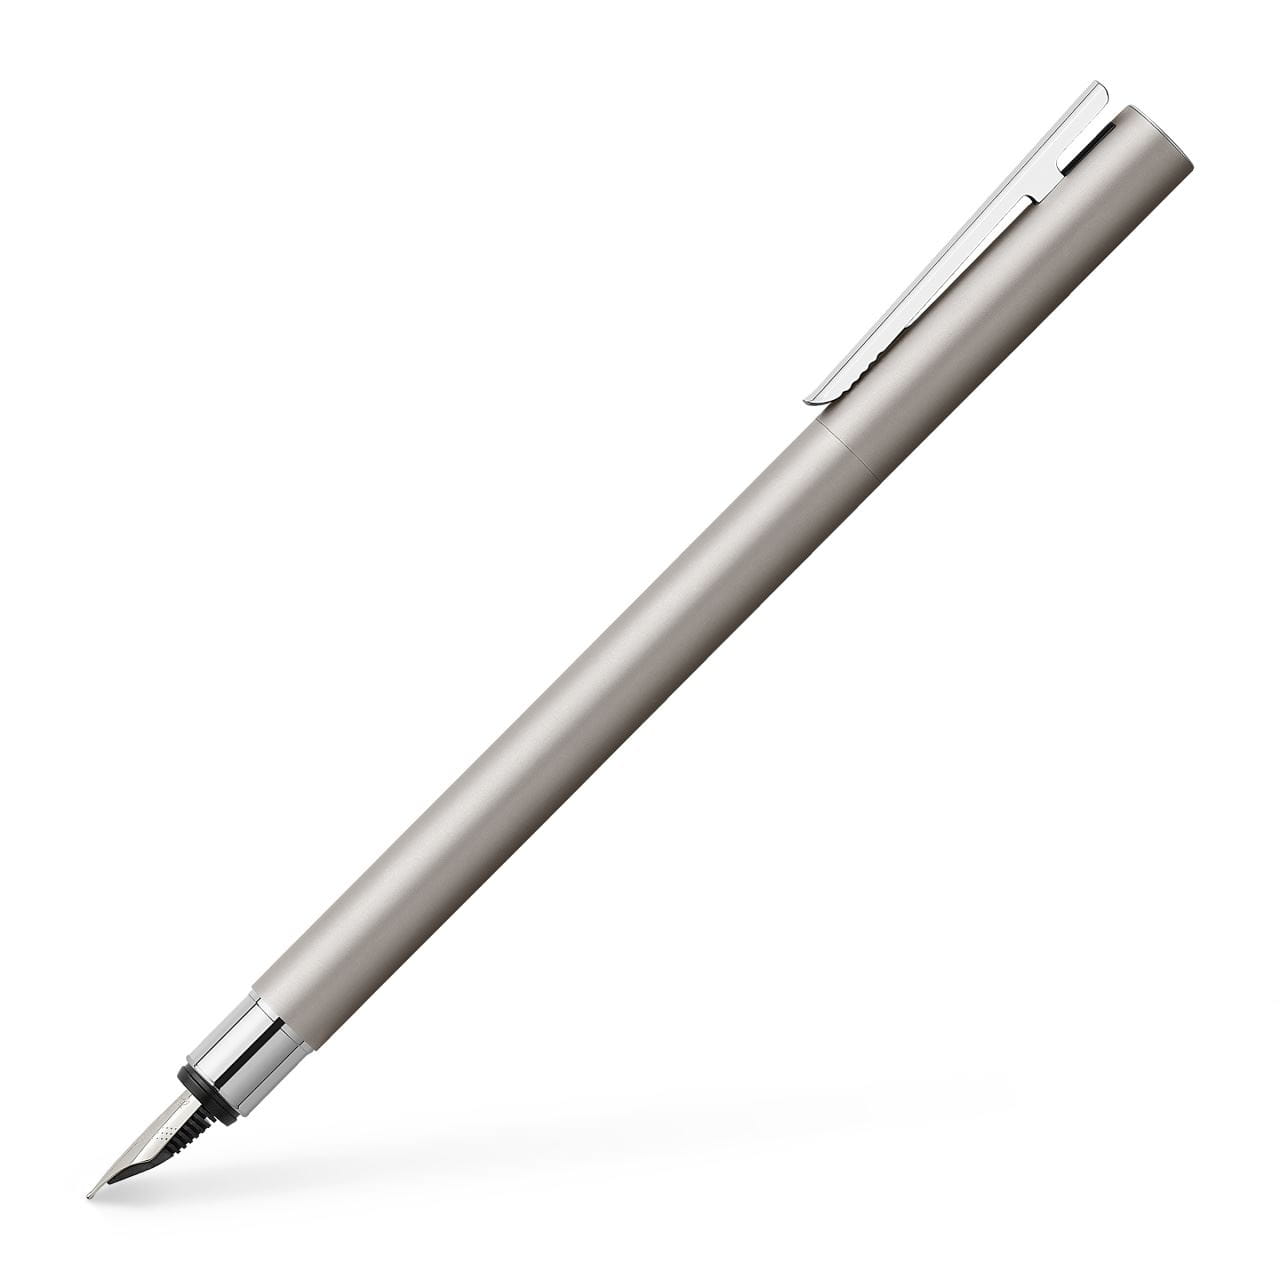 Faber-Castell - Stylo à plume Neo Slim acier inoxydable, mat, extra-fin